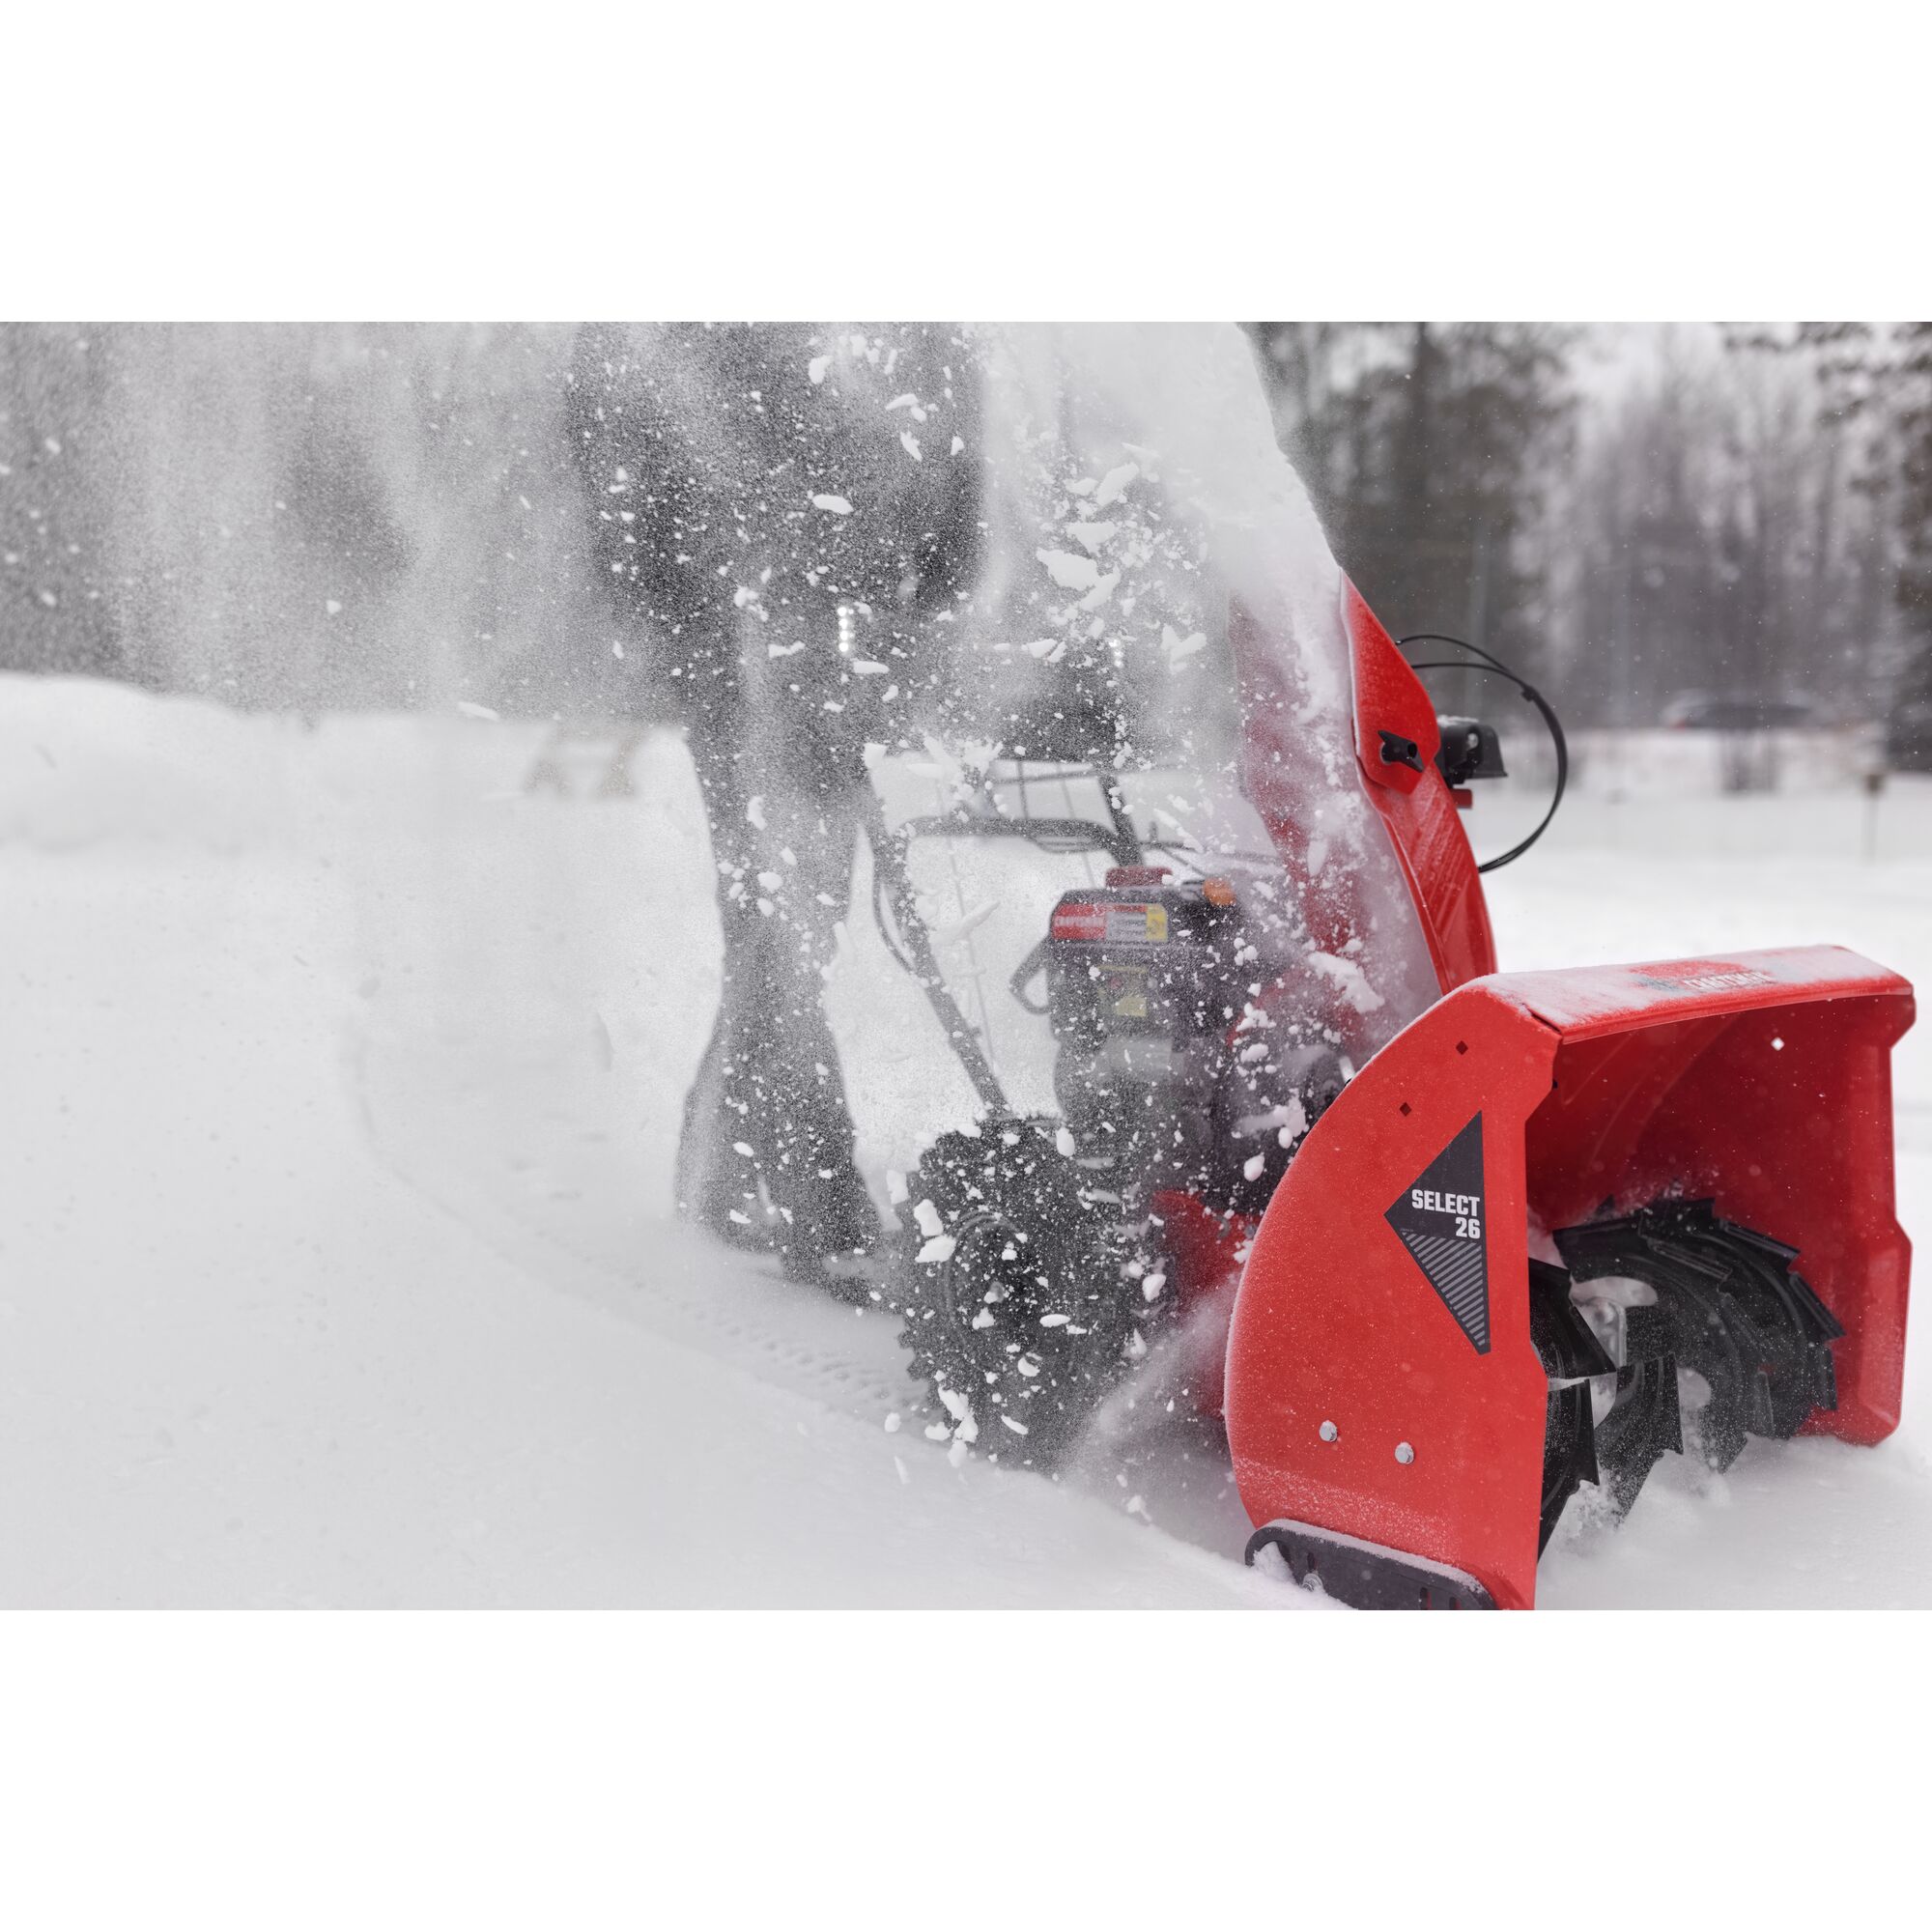 CRAFTSMAN Select 26 Snowblower zoomed in clearing snow from driveway trees in background